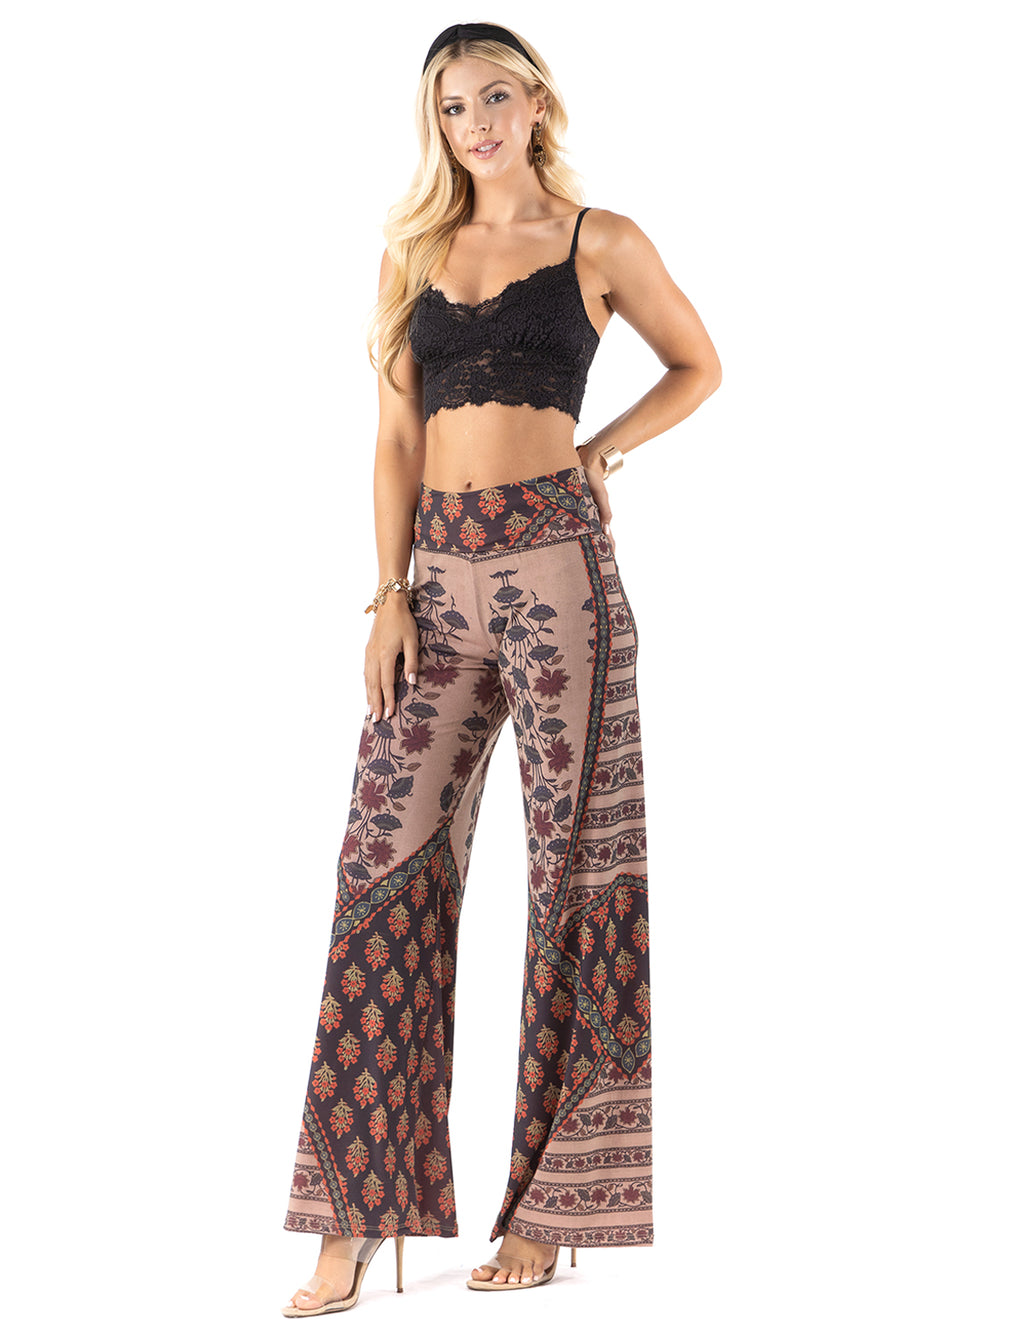 Beautiful woman wearing this amazing  Brown Multi Floral  High waist palazzo pants featuring pockets, wide legs, and a comfortable stretchy fabric Perfect during spring, summer,Concerts, Festivals, Dance